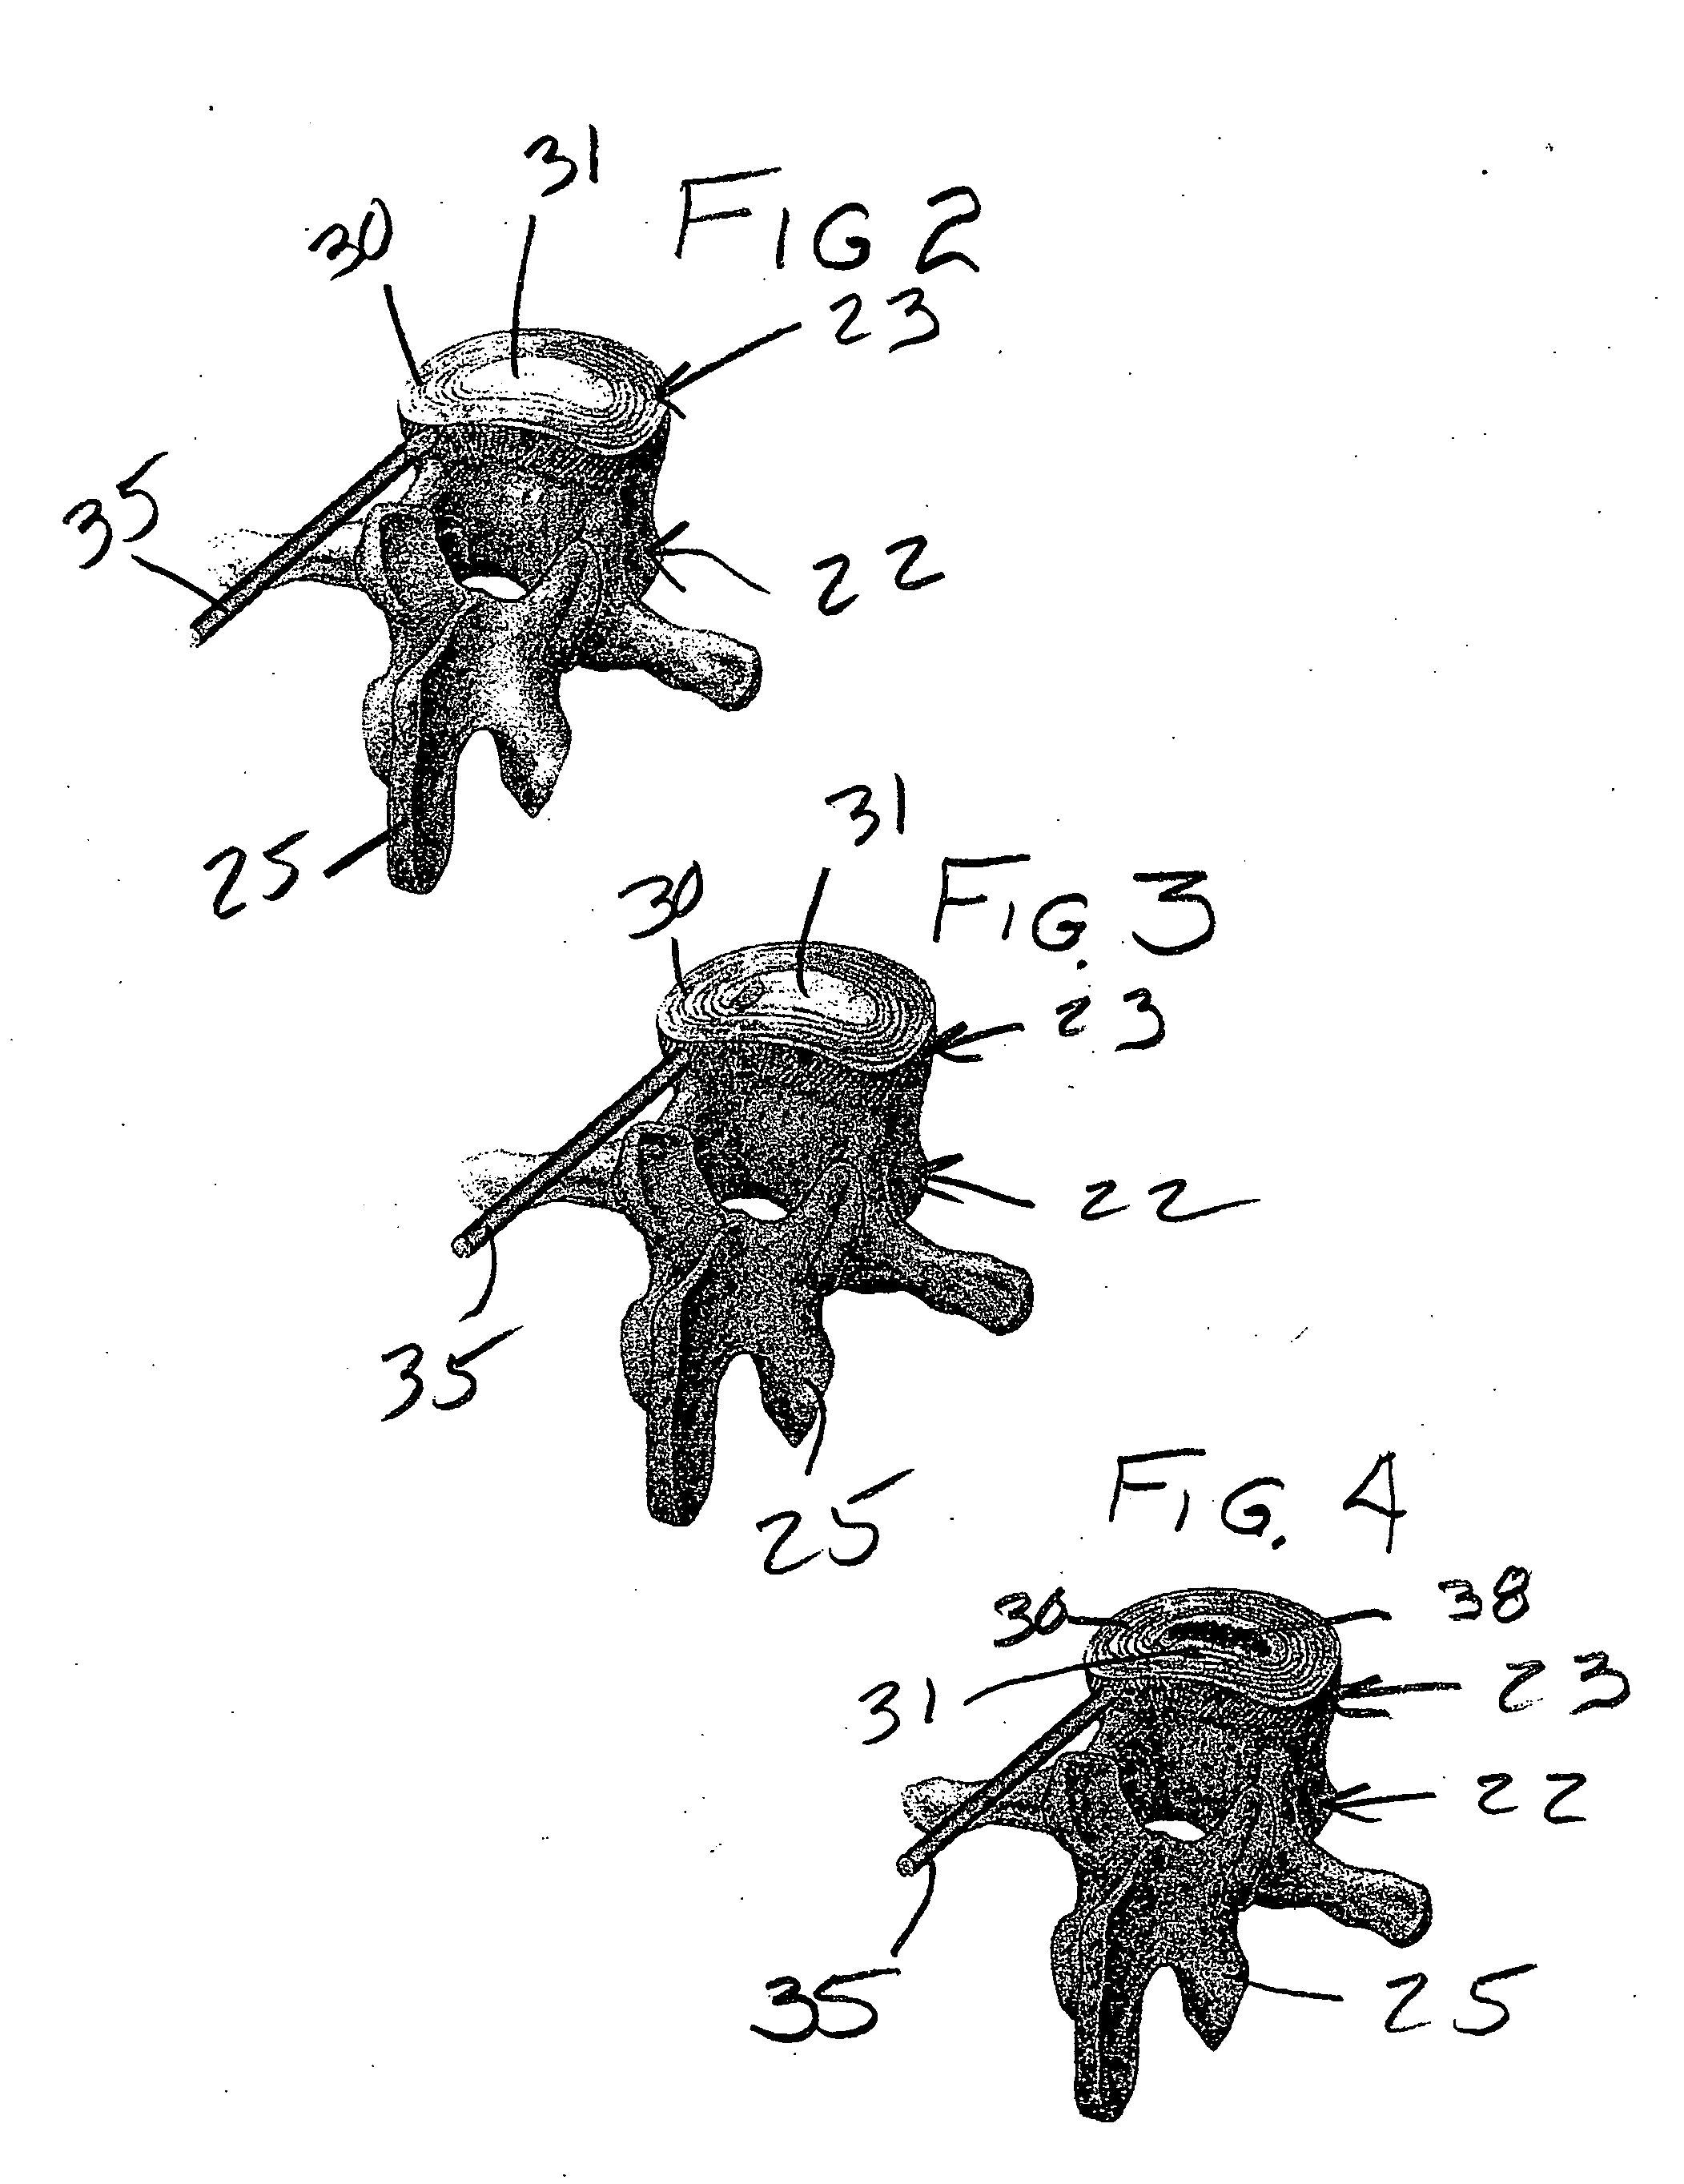 Method and composition for repair and reconstruction of intervertebral discs and other reconstructive surgery